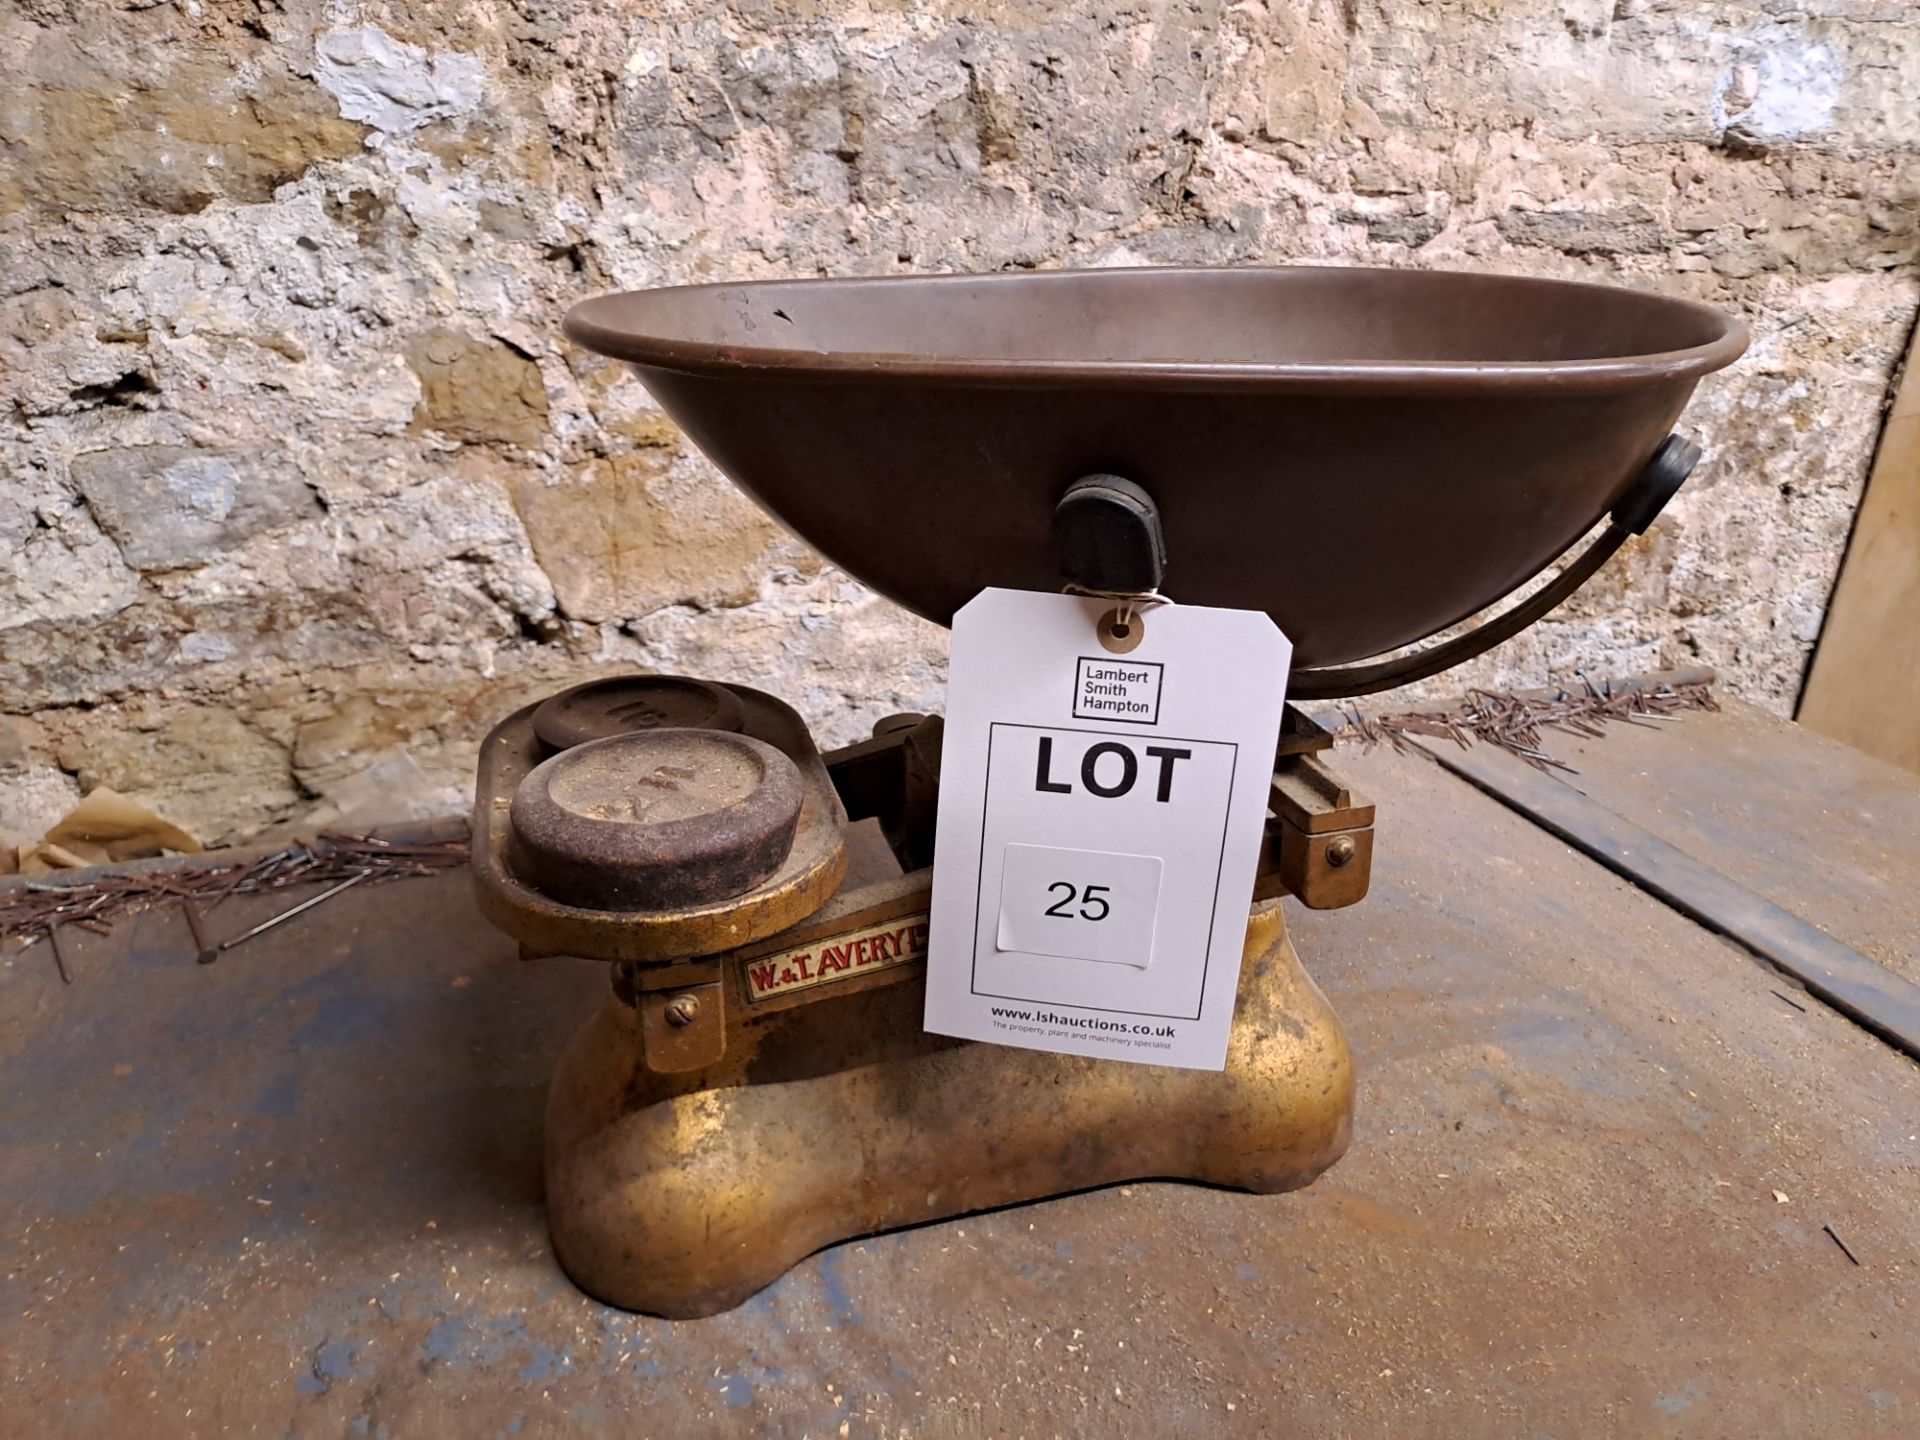 W&T Avery Ltd weighing scales